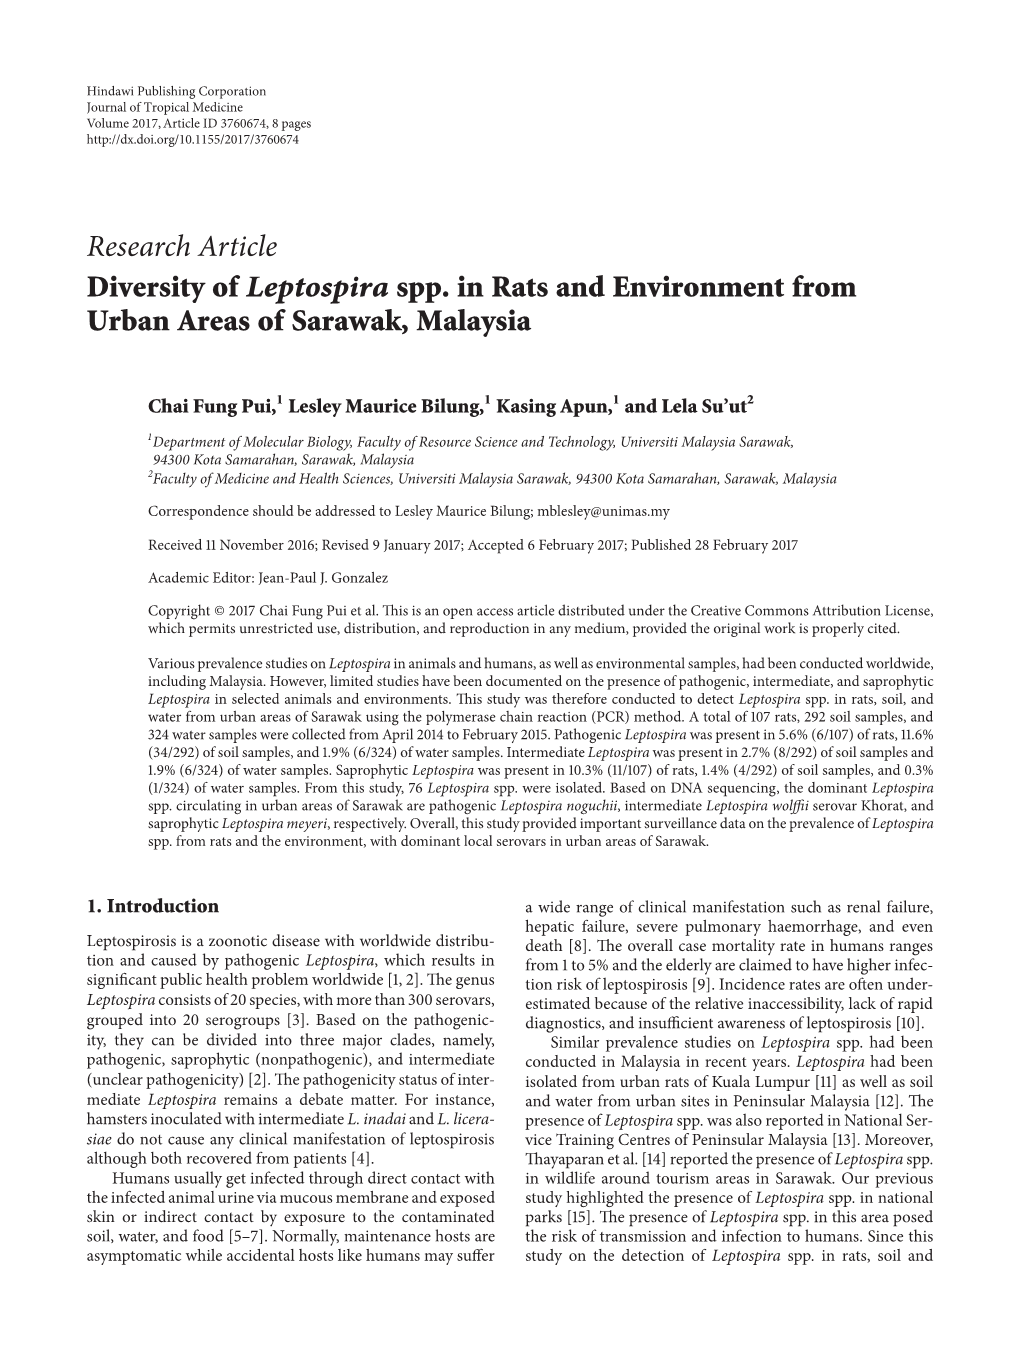 Research Article Diversity of Leptospira Spp. in Rats and Environment from Urban Areas of Sarawak, Malaysia